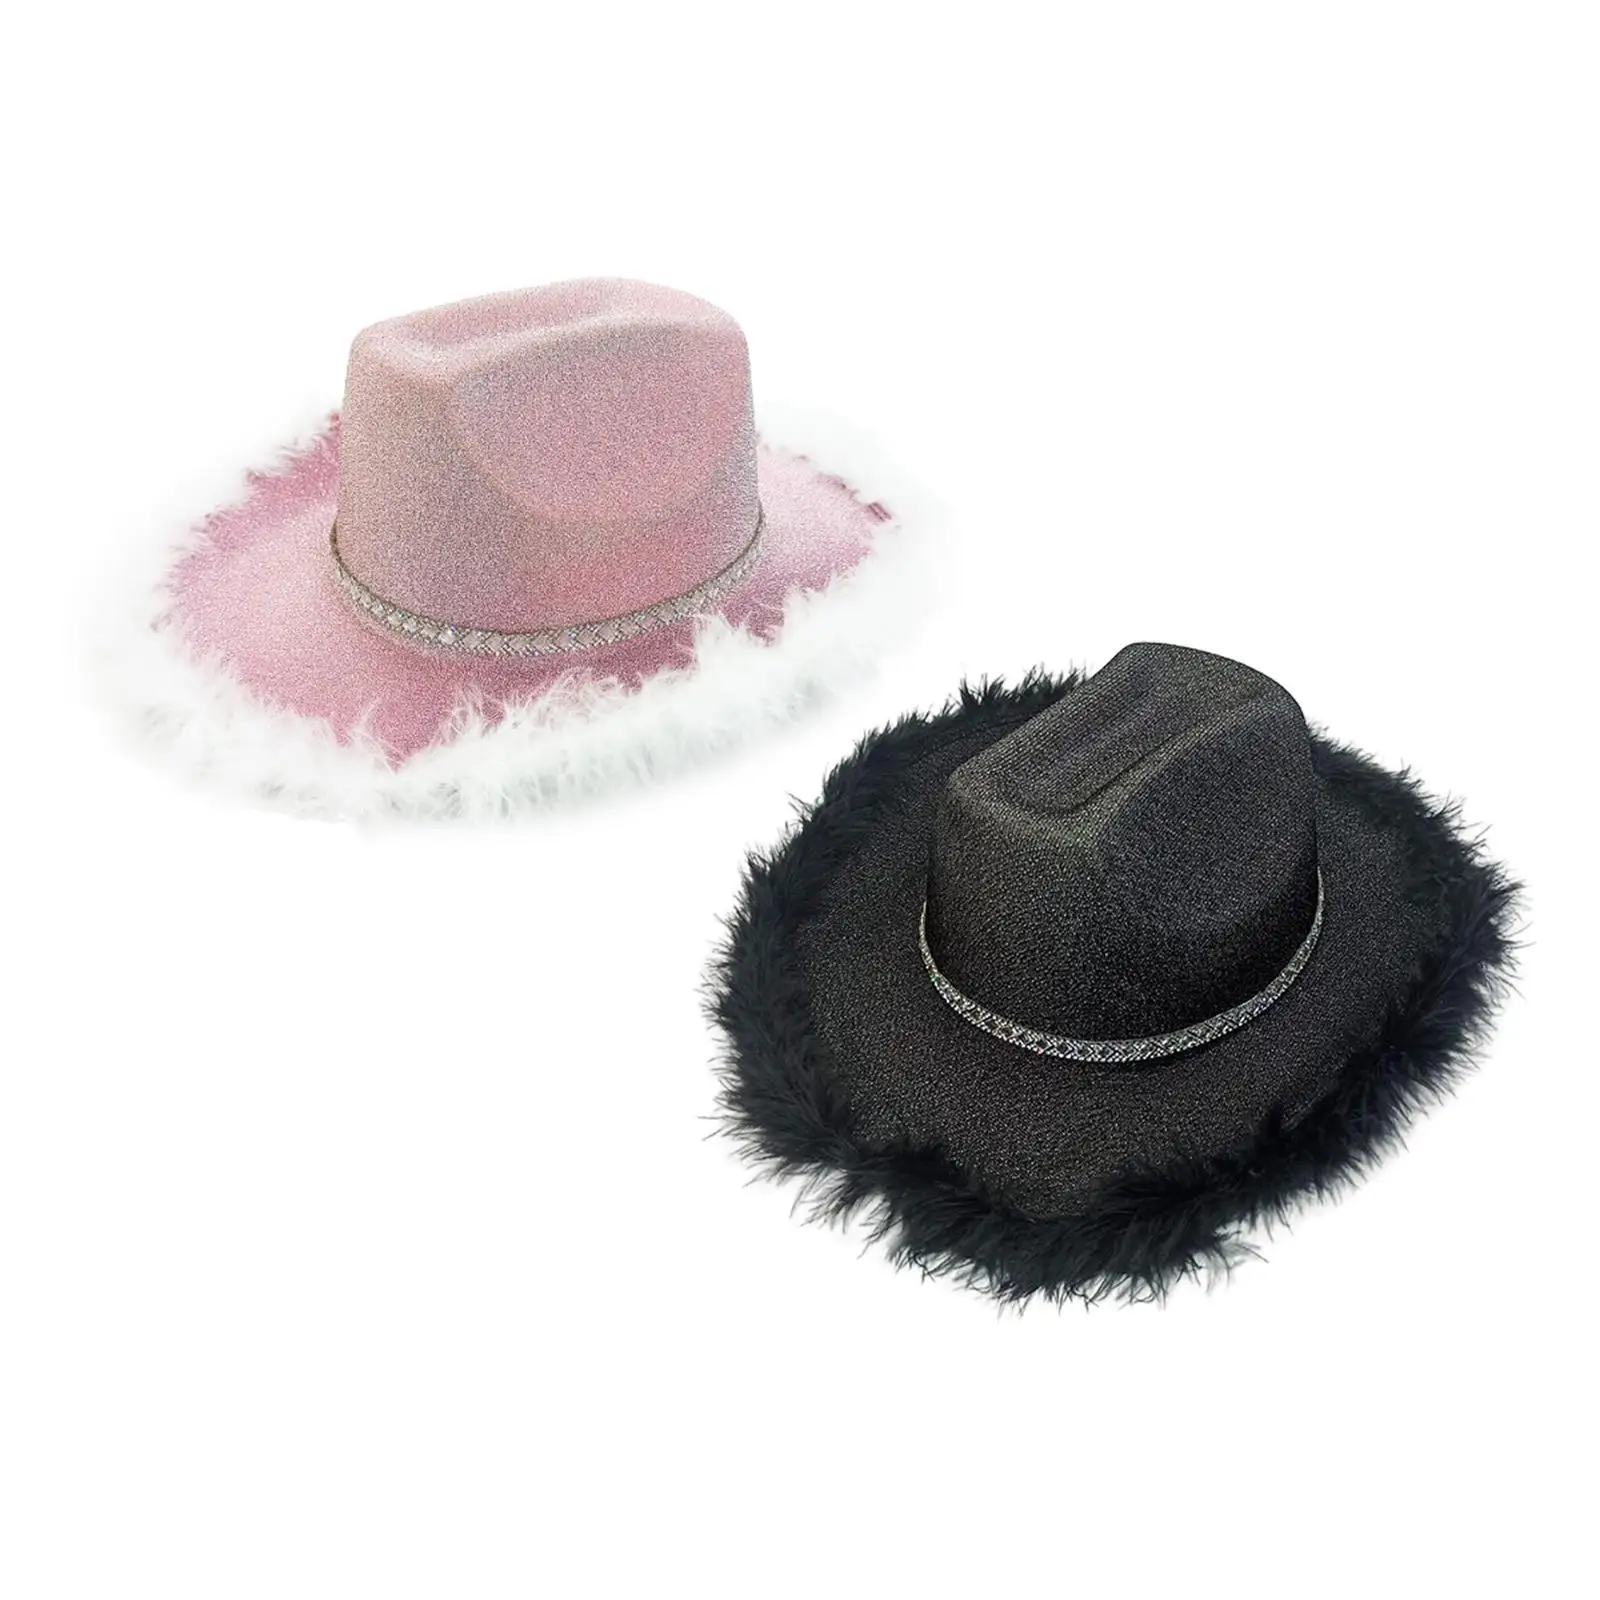 Shiny Cowboy Hat Costume Cosplay Sequin Fancy Dress Cowgirl Hat with Artificial Feather Trim for Parties Unisex Play Party Night